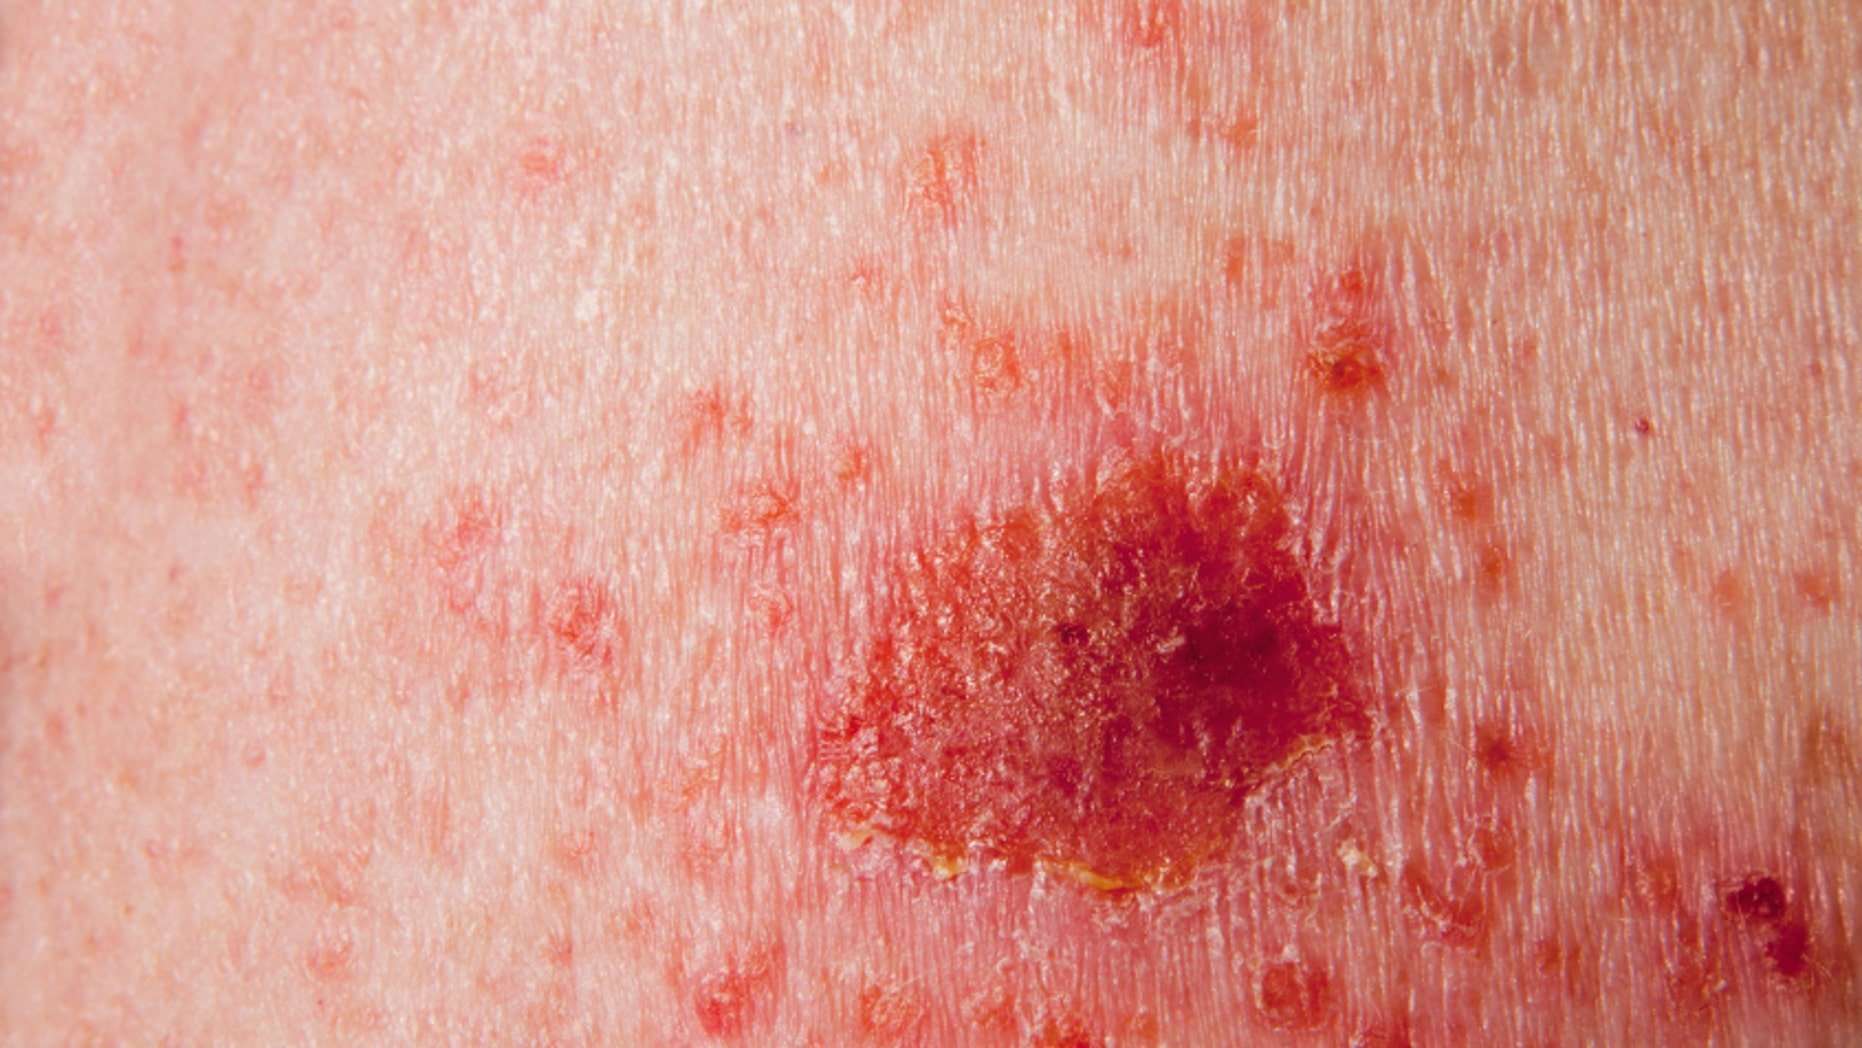 Itching, pain may be indicators of skin cancer